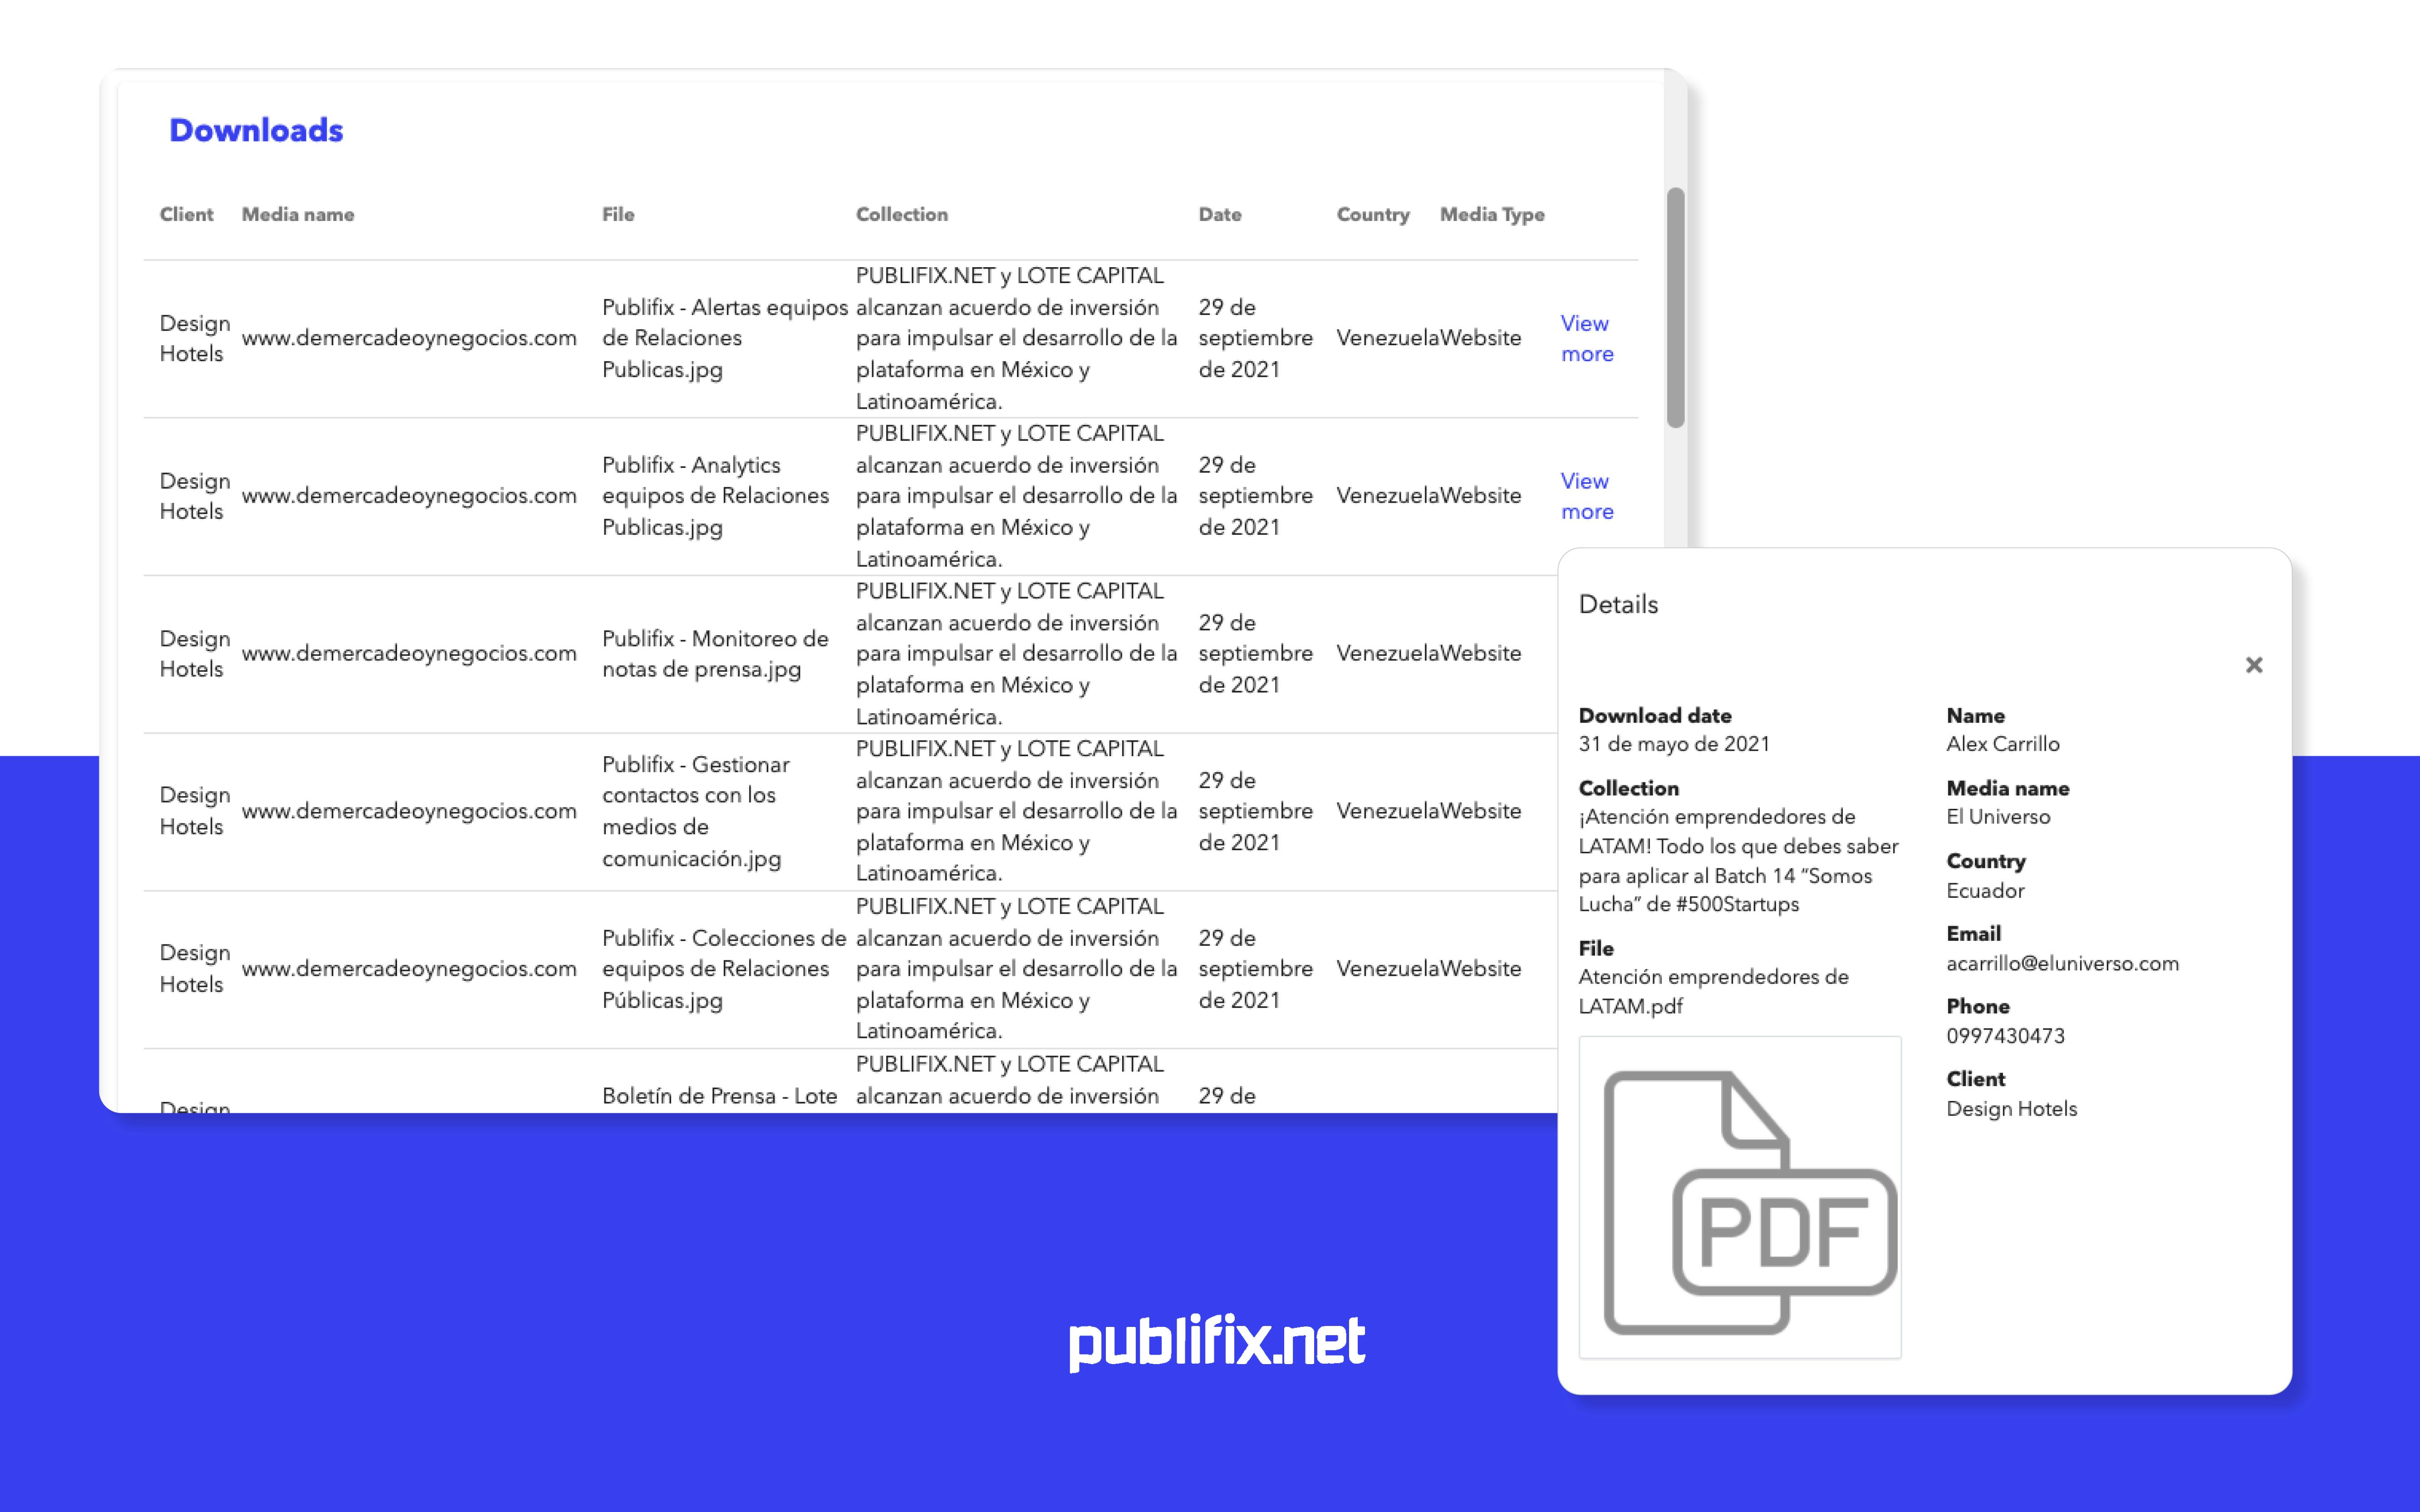 Publifix Software - Get instant access to your download reports and the contact information of the media outlet that has downloaded your files